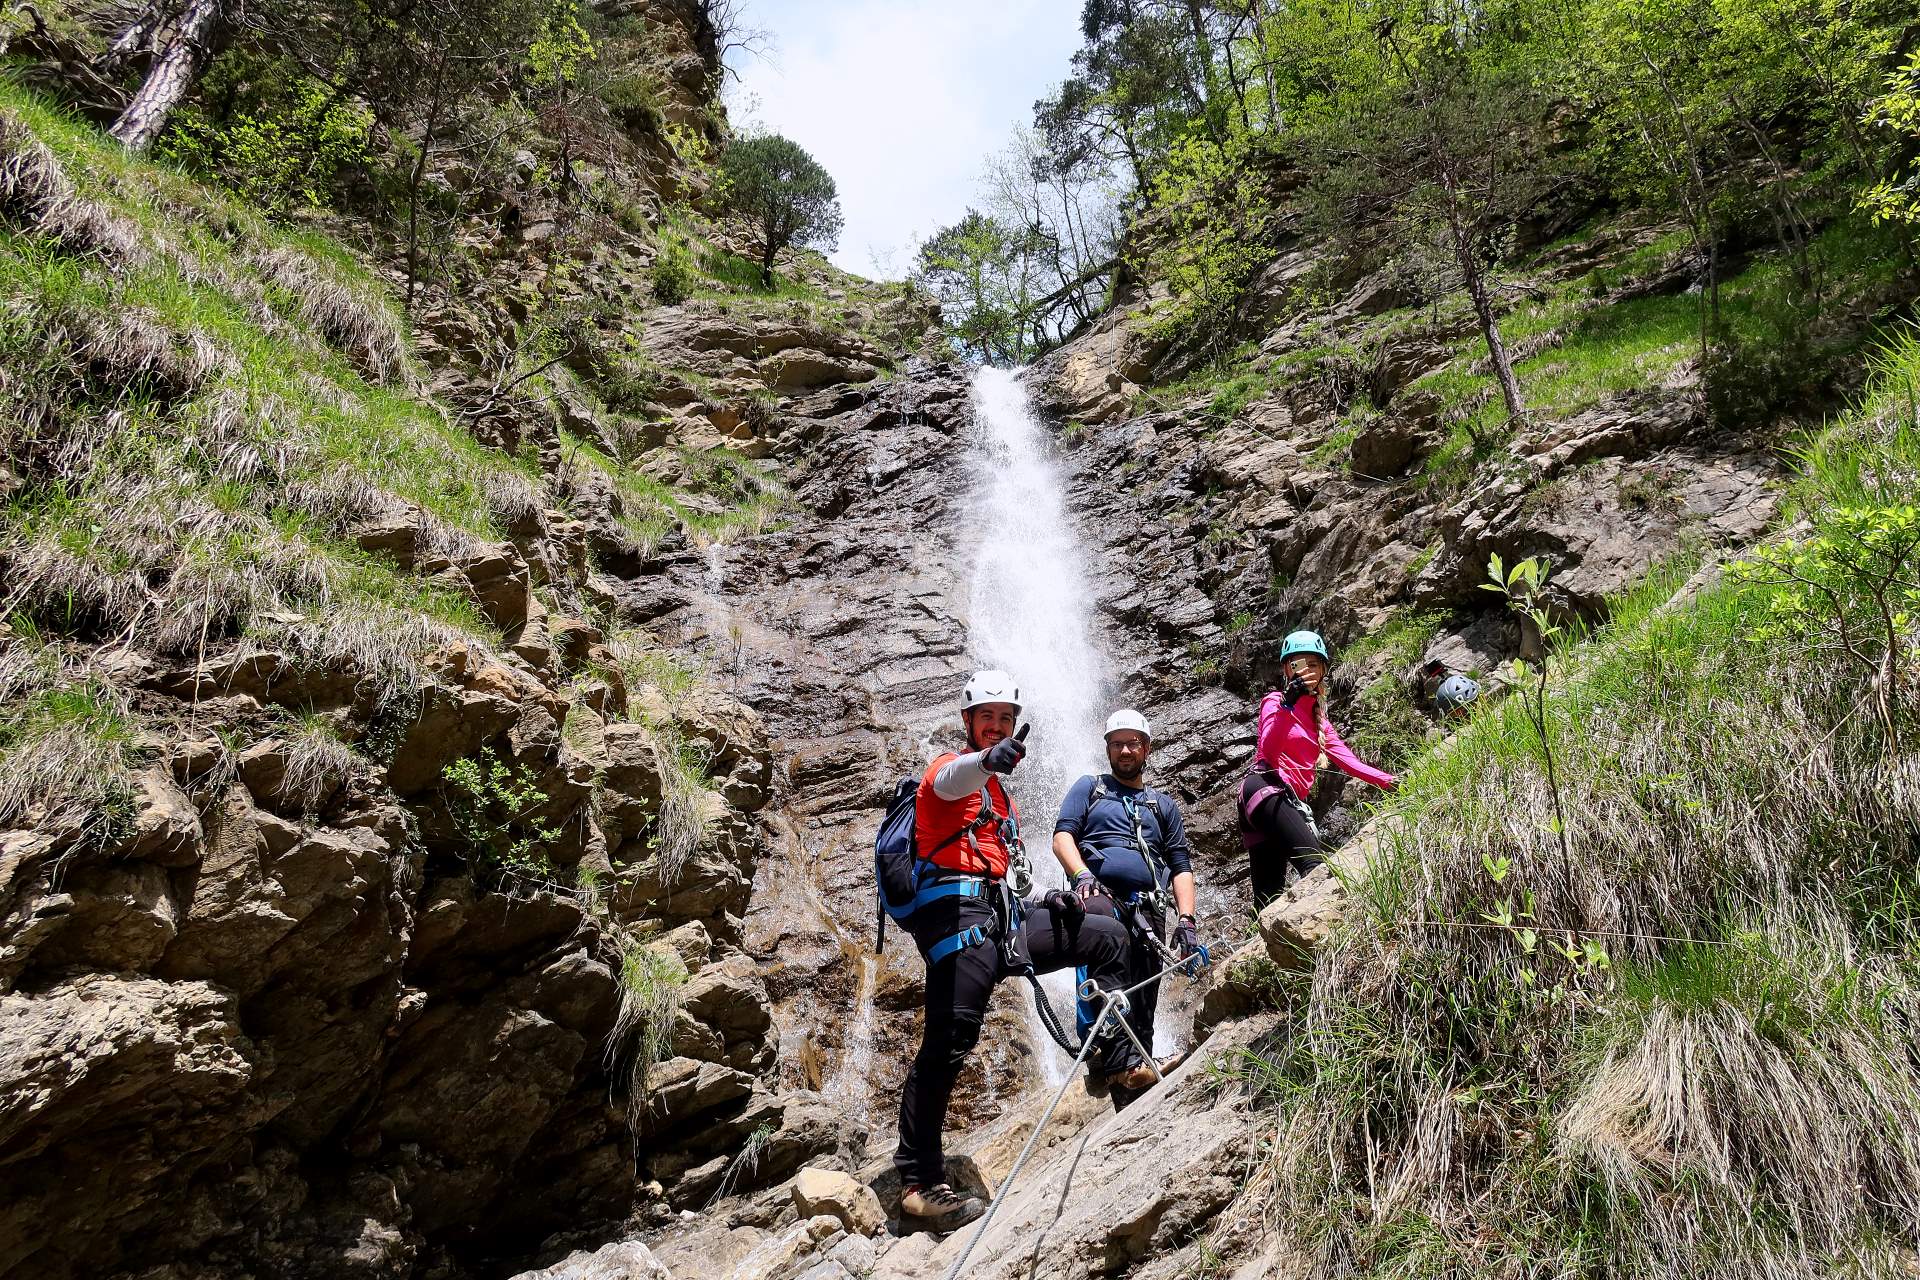 Guided ascent trough a gorge full of waterfalls and unspoilt nature.